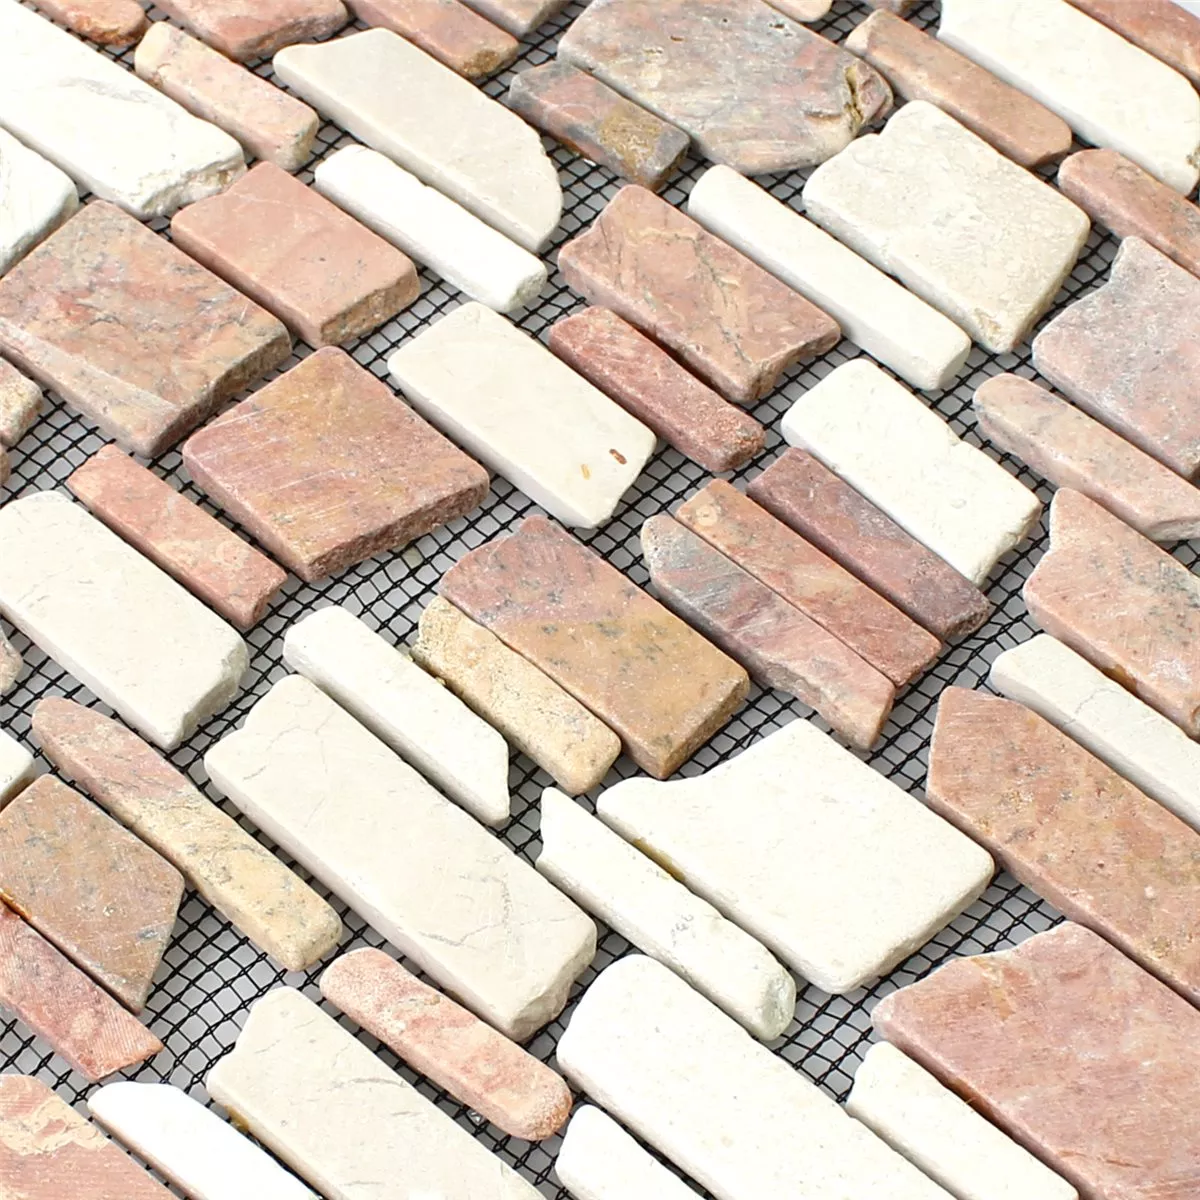 Sample Mosaic Tiles Marble Natural Stone Brick Biancone Rosso